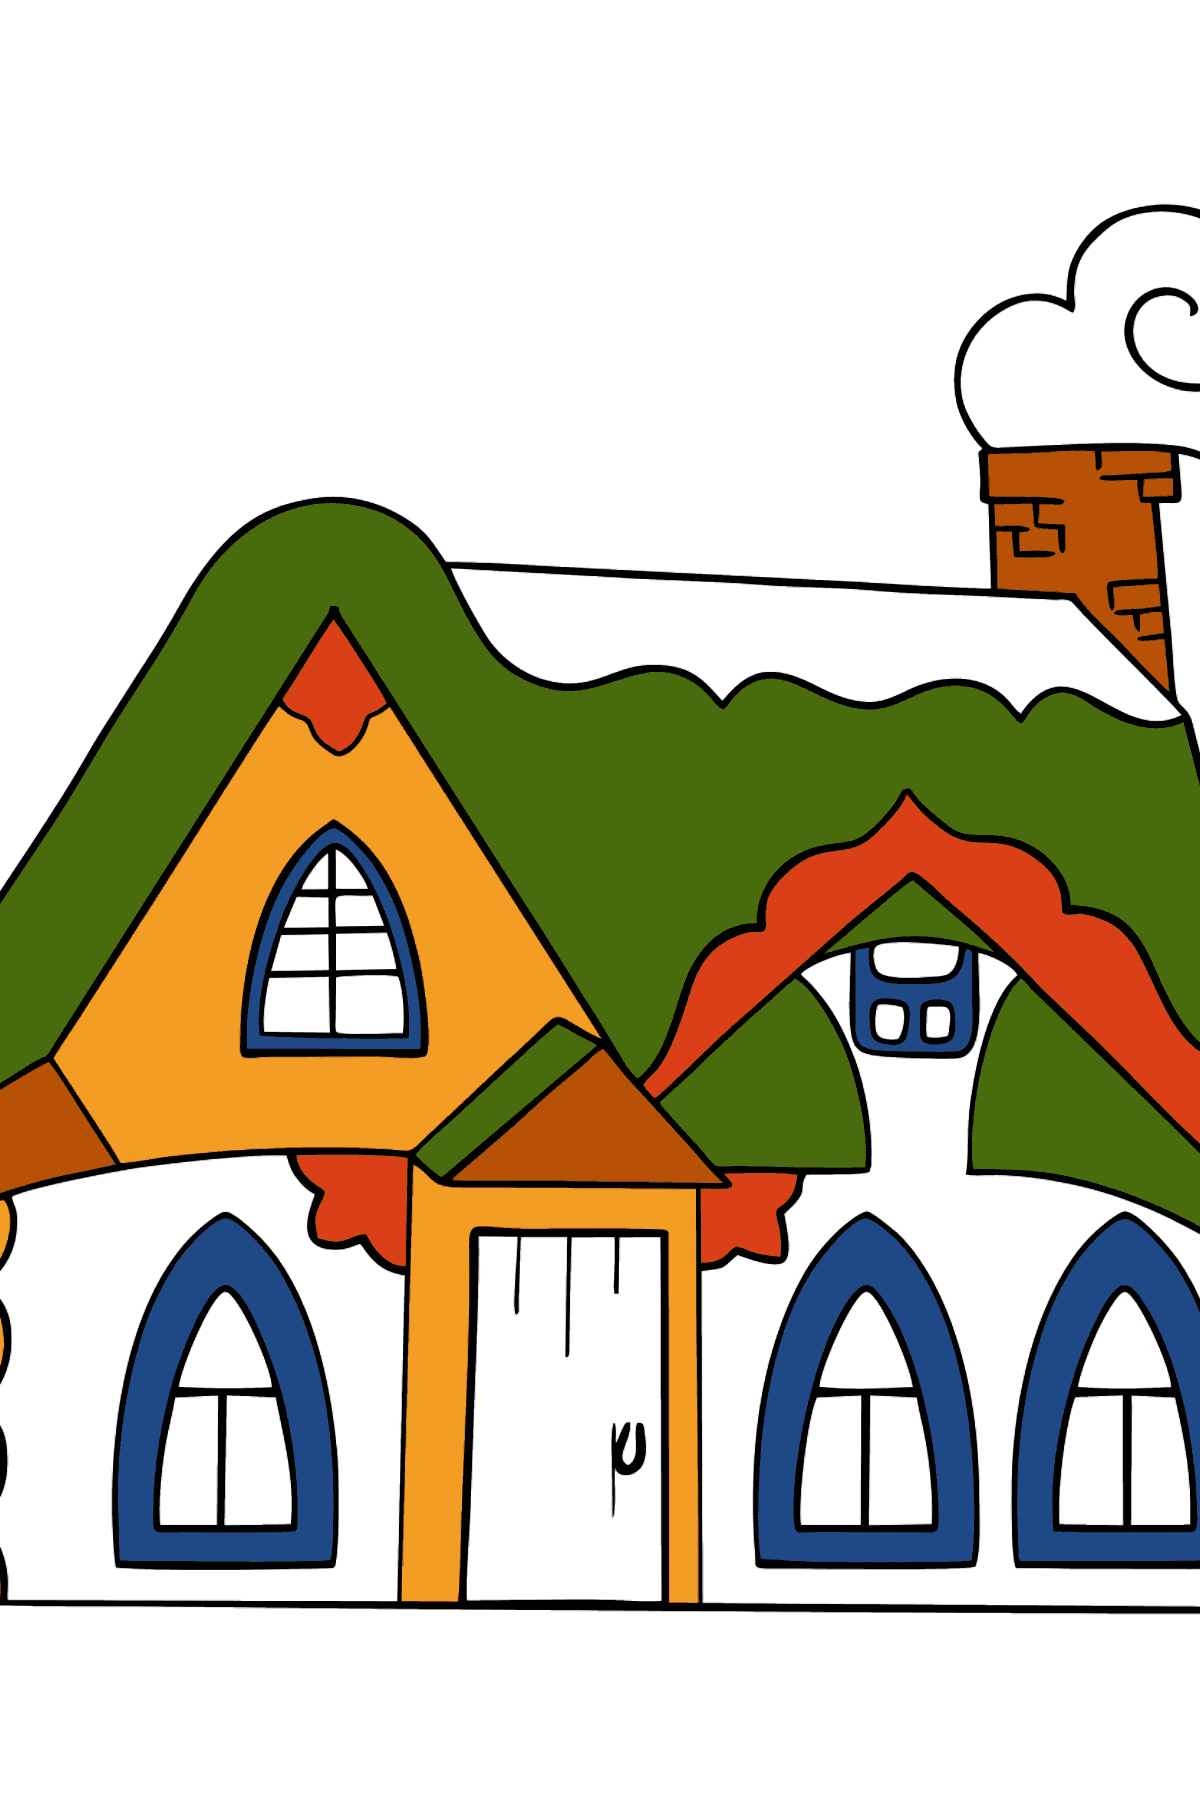 Fairytale House Coloring Page - Coloring Pages for Kids